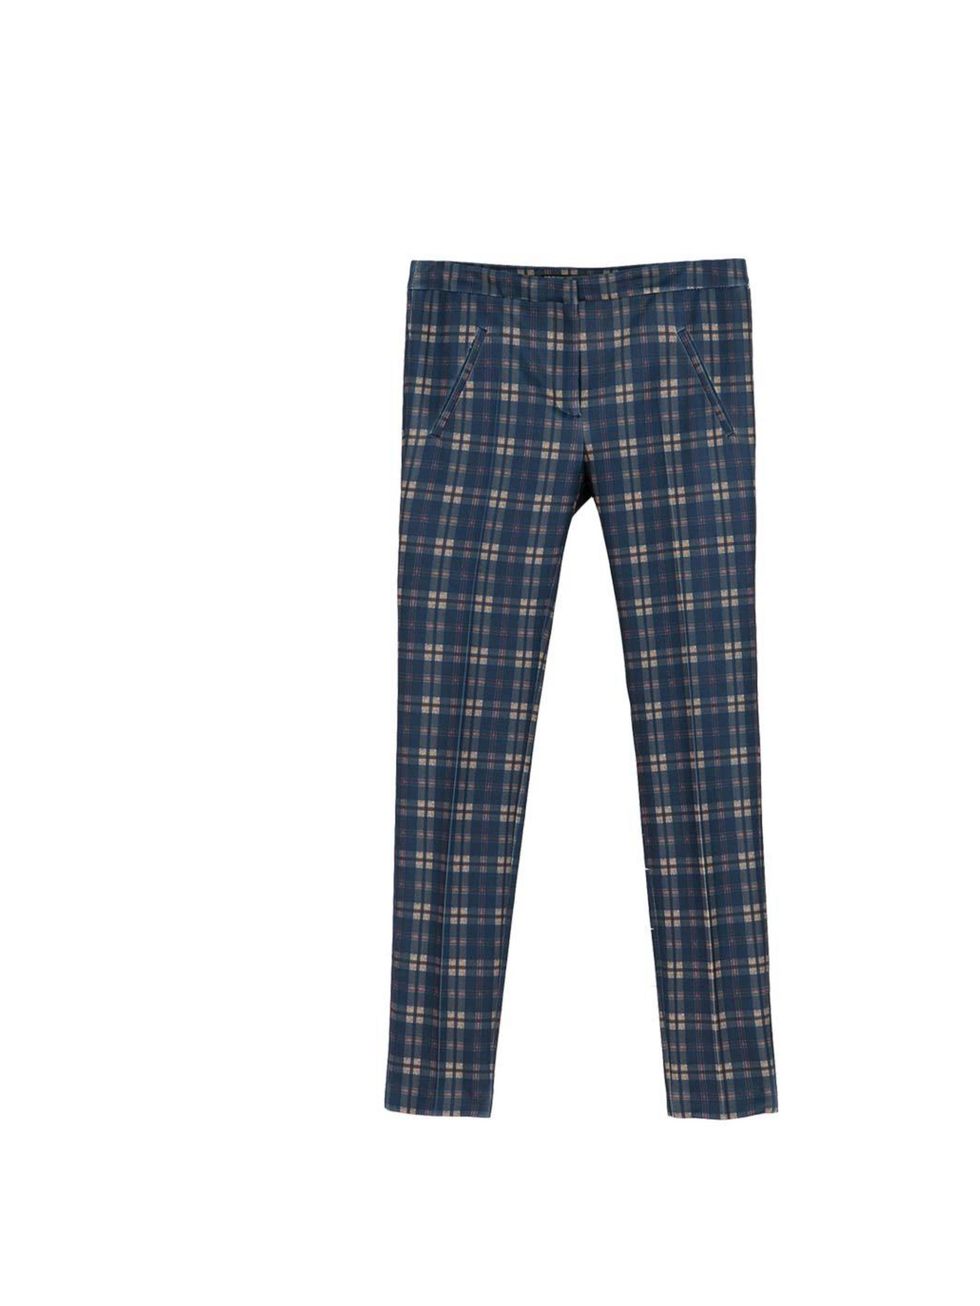 <p>Pair these slim-fitting checked trousers with an oversized white shirt and patent loafers for androgynous office style.</p><p><a href="http://www.zara.com/uk/en/new-this-week/woman/checked-trousers-with-piping-on-pocket-c287002p1655502.html">Zara</a> t